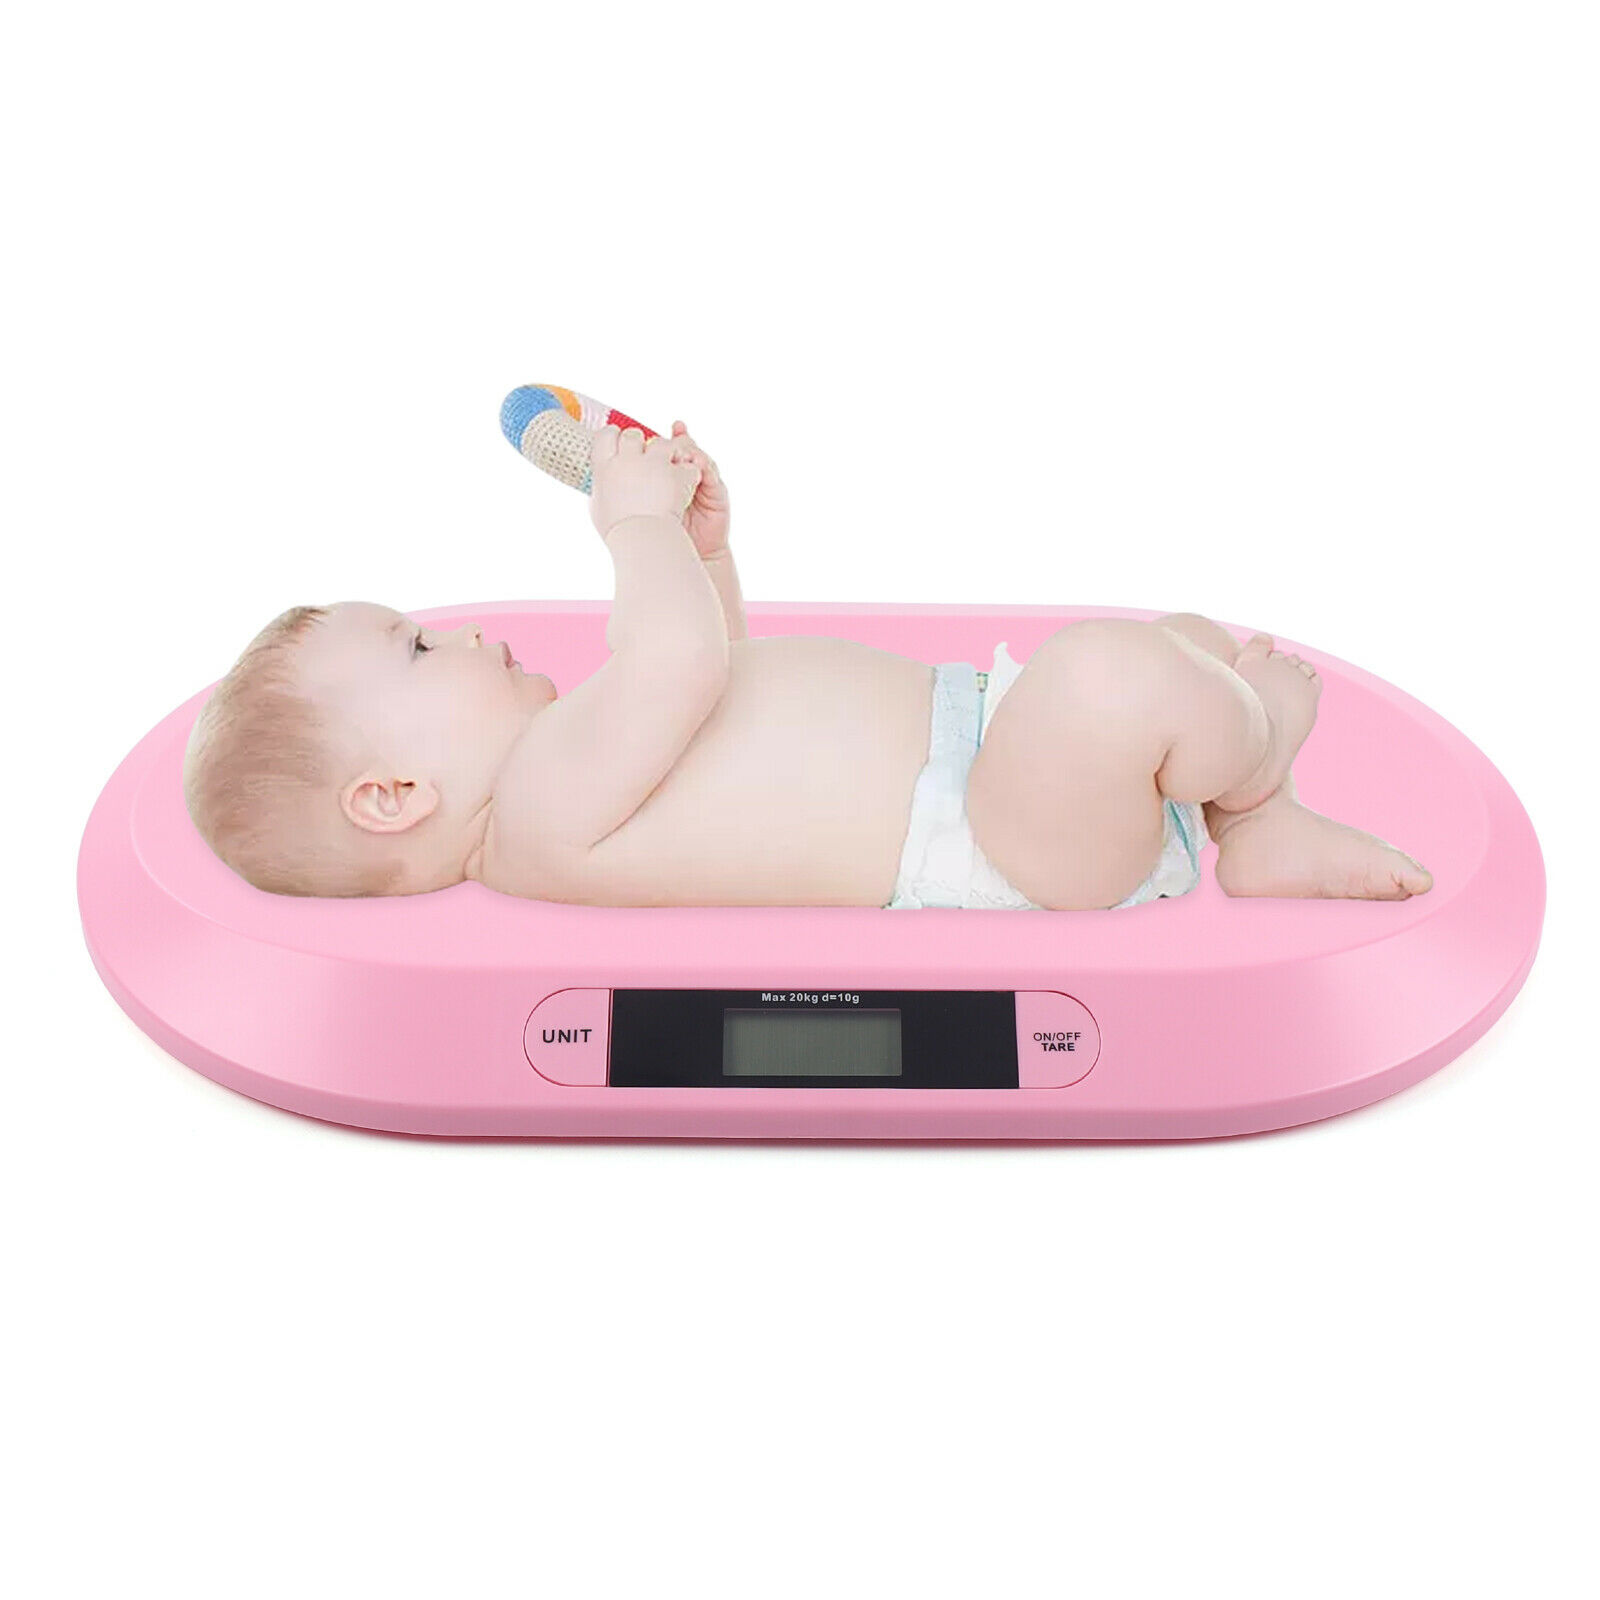 Baby Scale Infant Baby Toddler Pet Digital Scale Weighing Scale Non-slip Feet